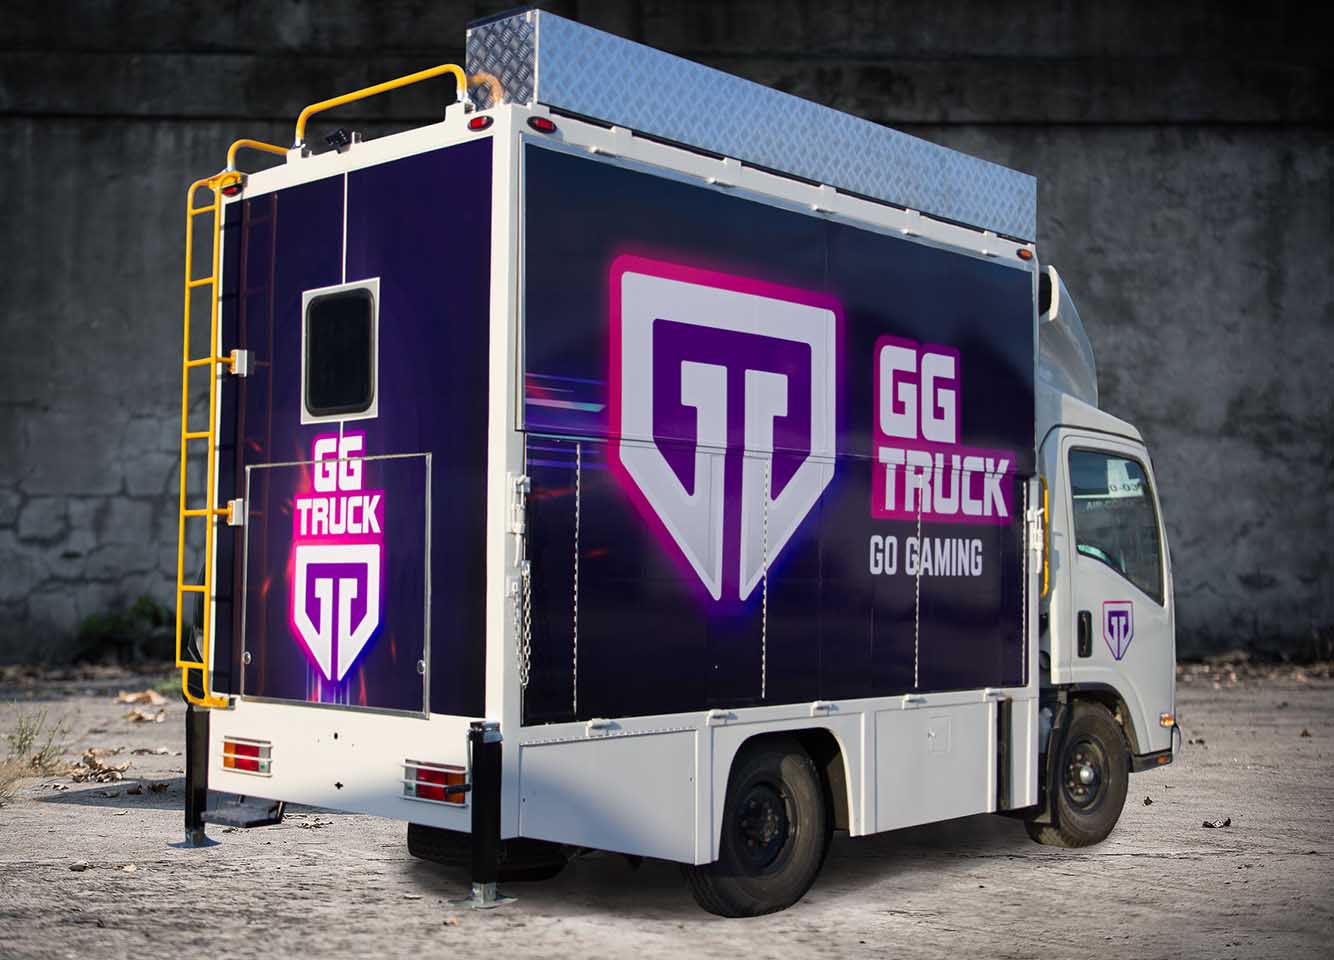 GG COMPANY Inc. launches the first Pop-up gaming truck in Southeast Asia